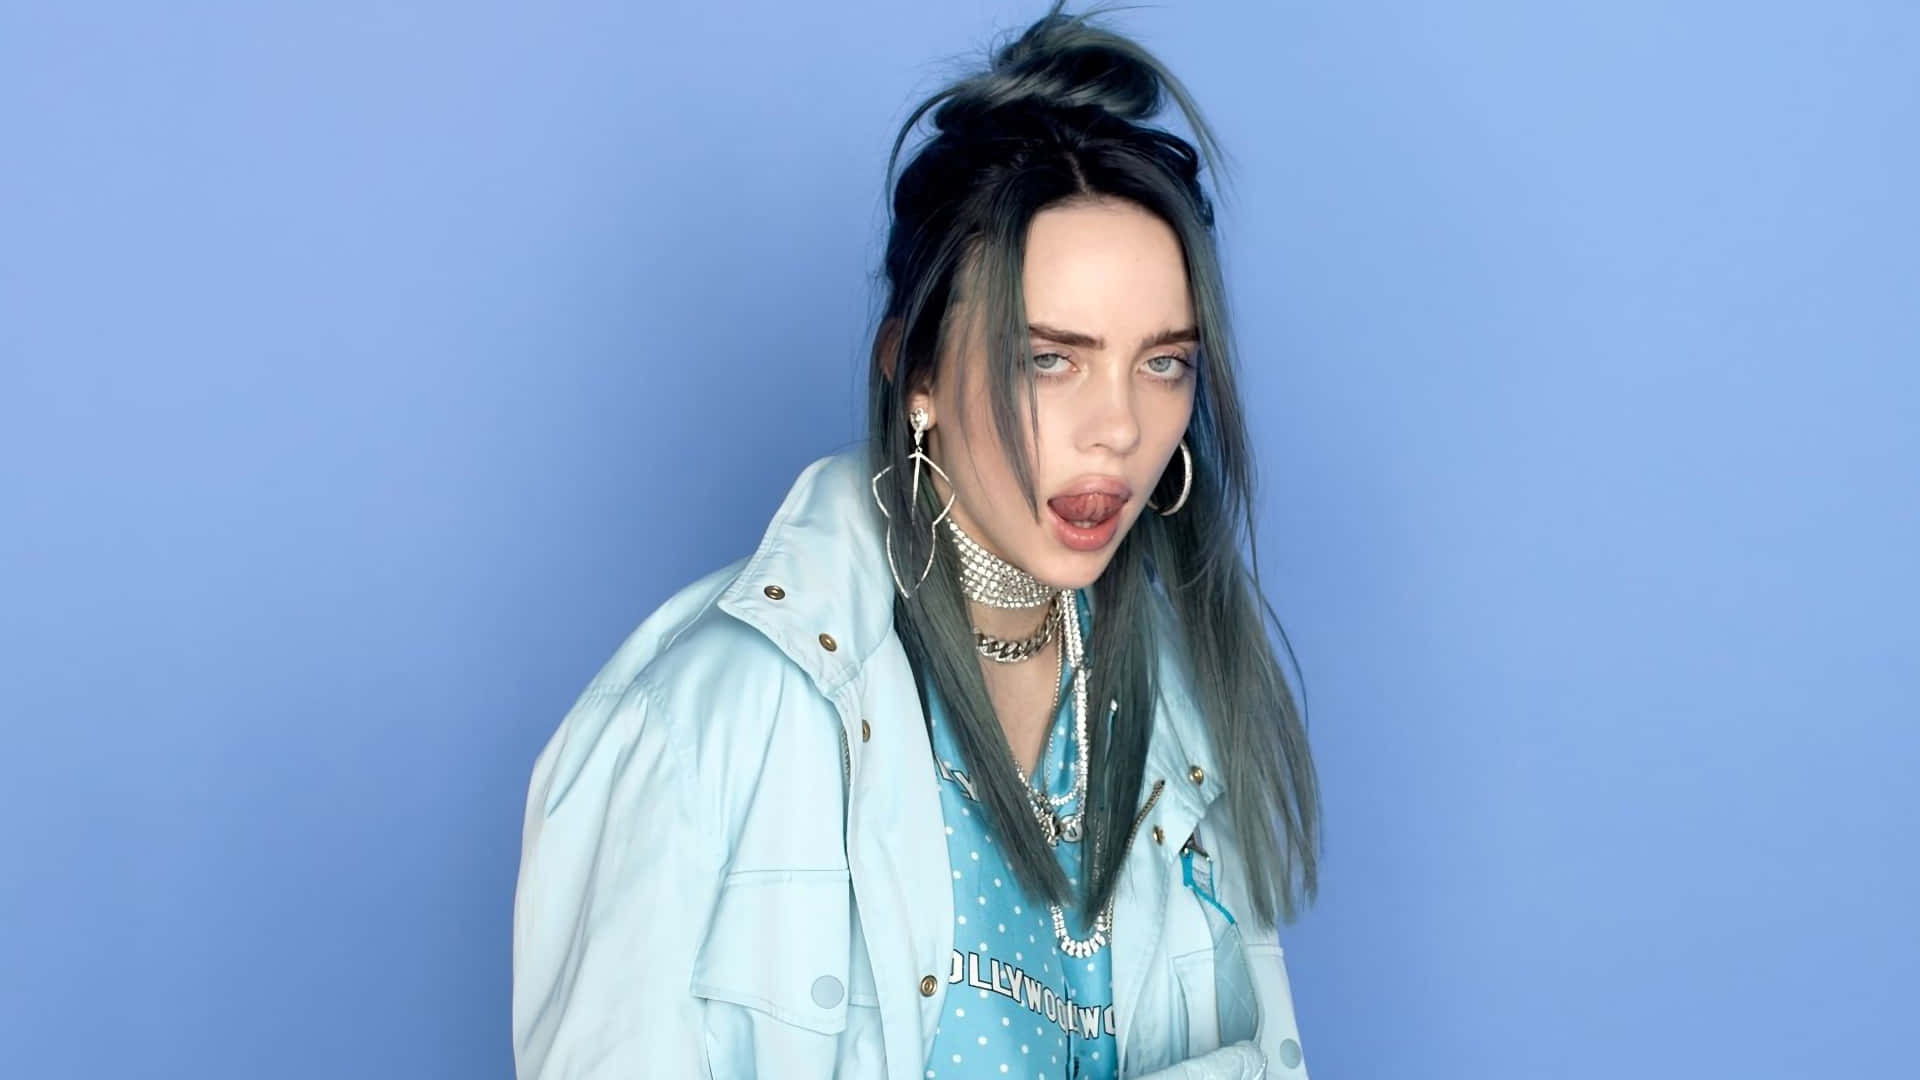 Billie Eilish with her laptop in a cozy home setting. Wallpaper